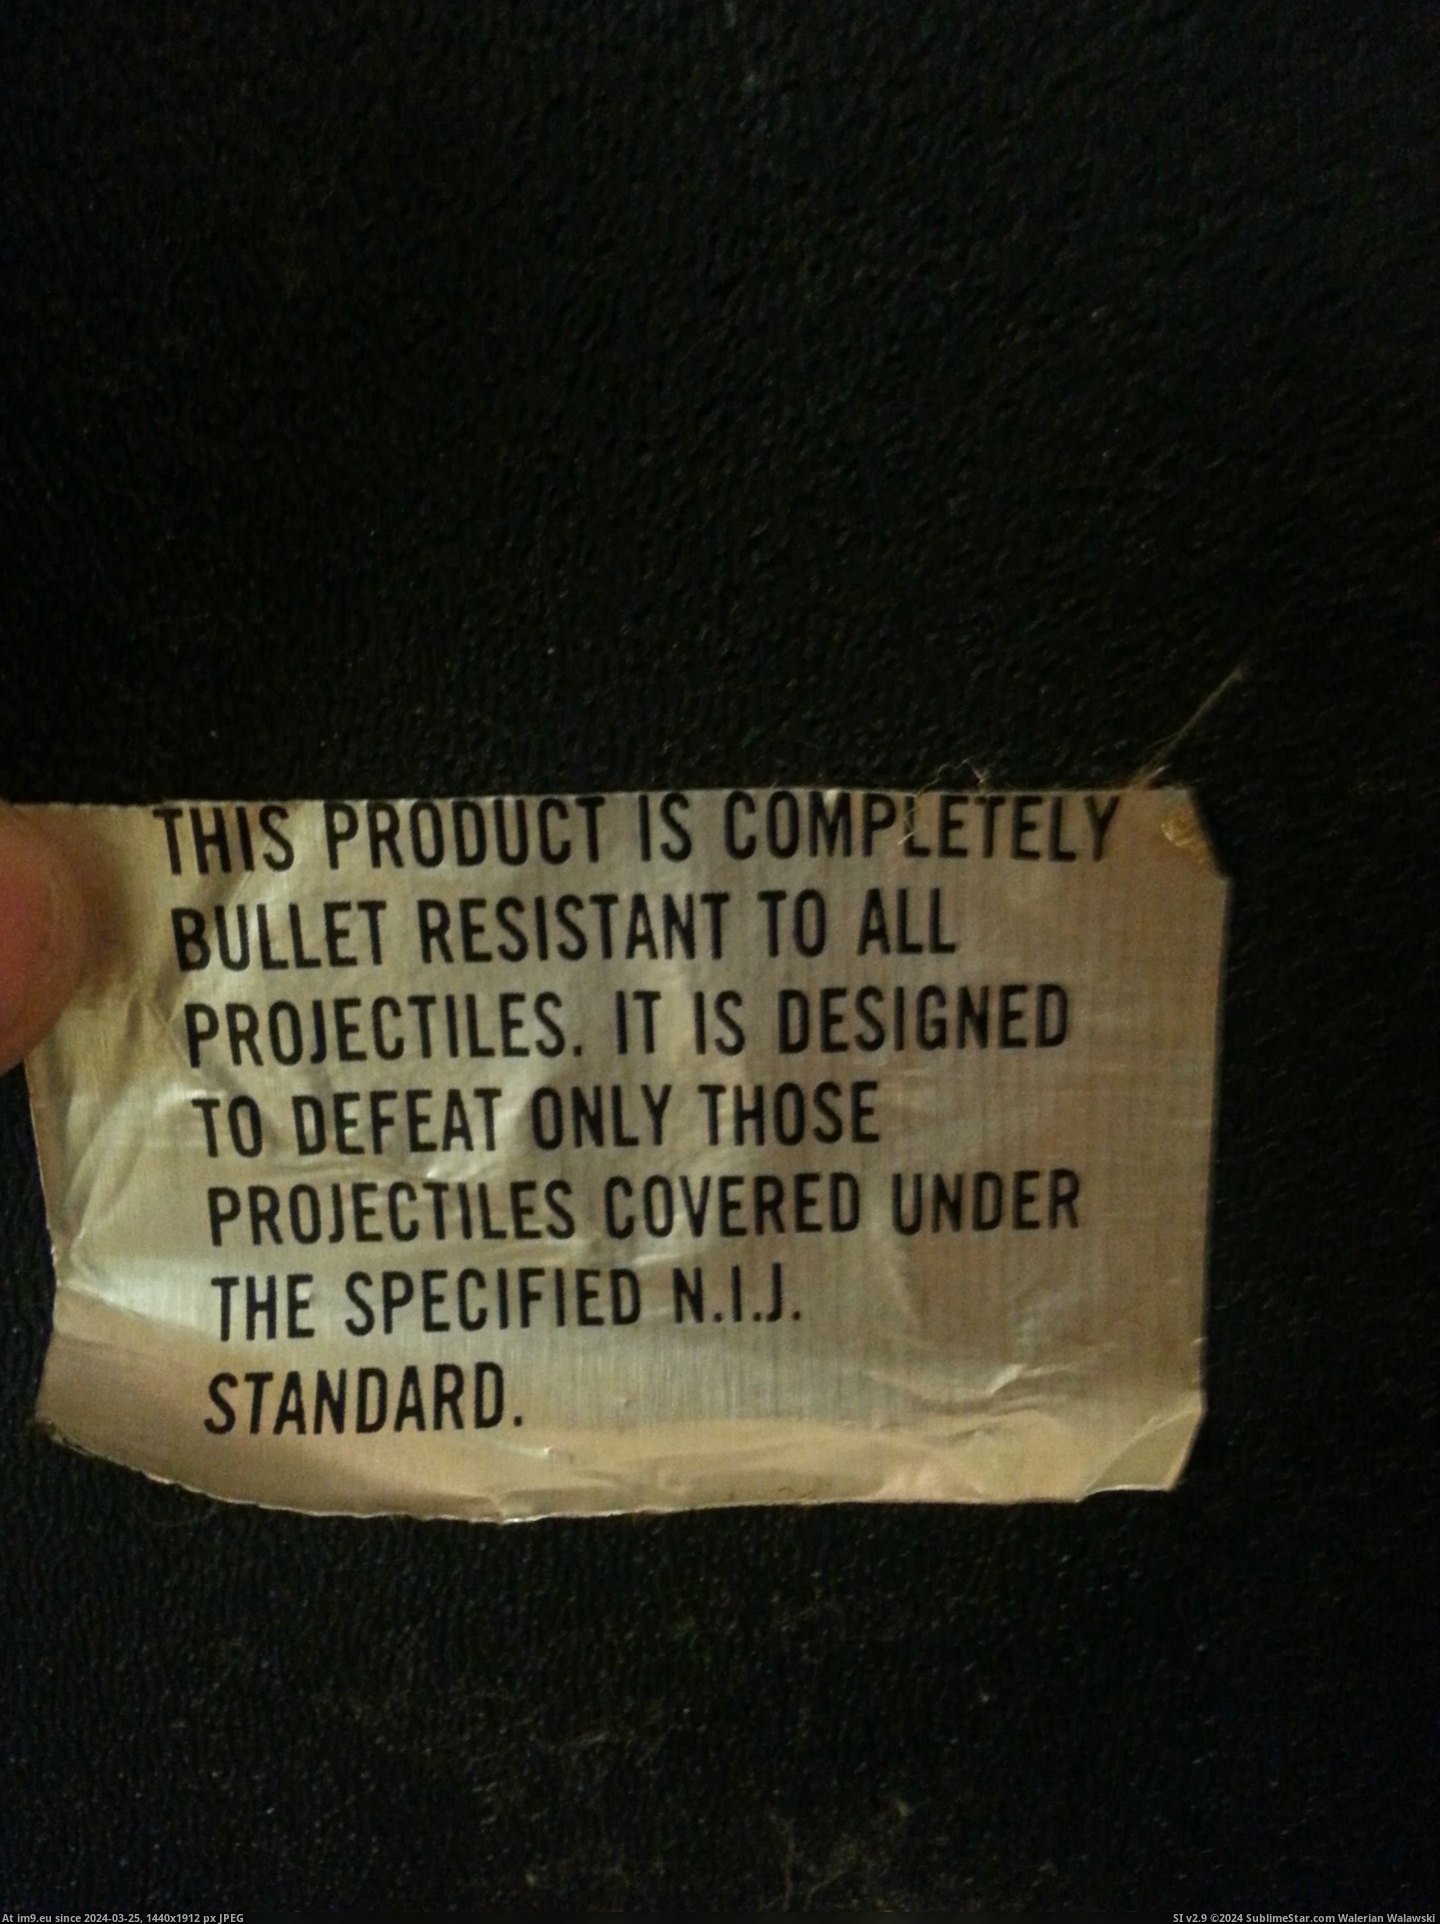 #Awesome #Find #Give #Riot #Shield #Resistant #Completely #Bullet #Goodwill [Pics] My awesome $40 Goodwill find: 'Completely bullet resistant' riot shield. Who would give this away? 3 Pic. (Image of album My r/PICS favs))